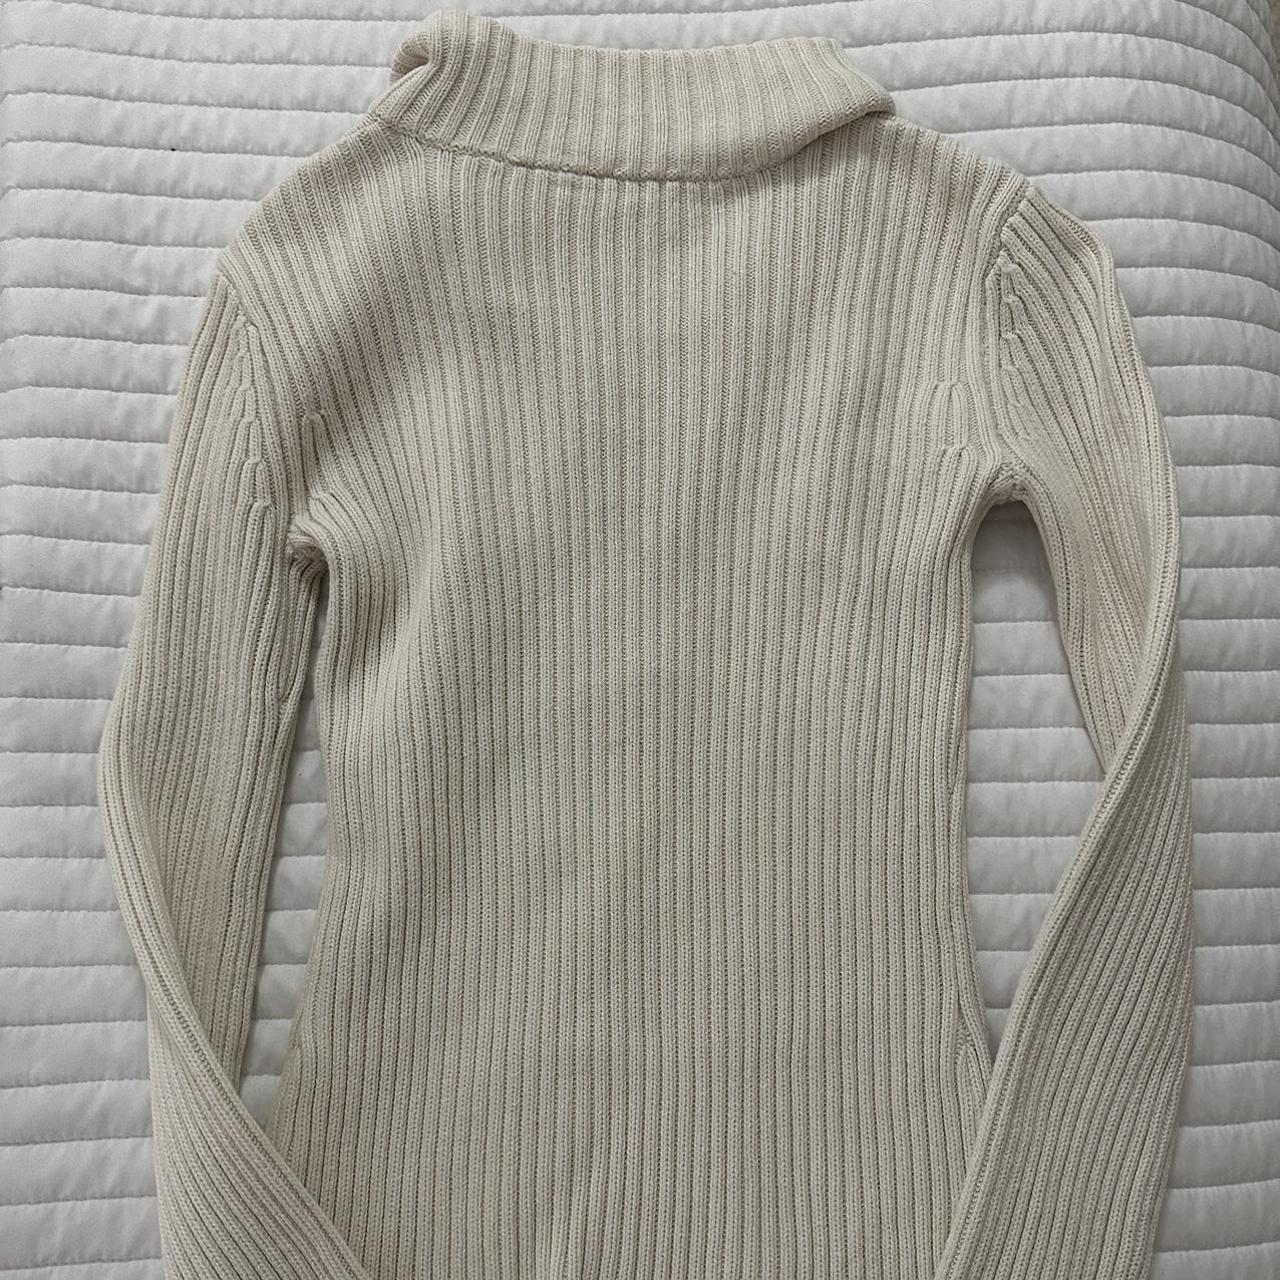 DKNY Women's Cream and Gold Jumper (3)